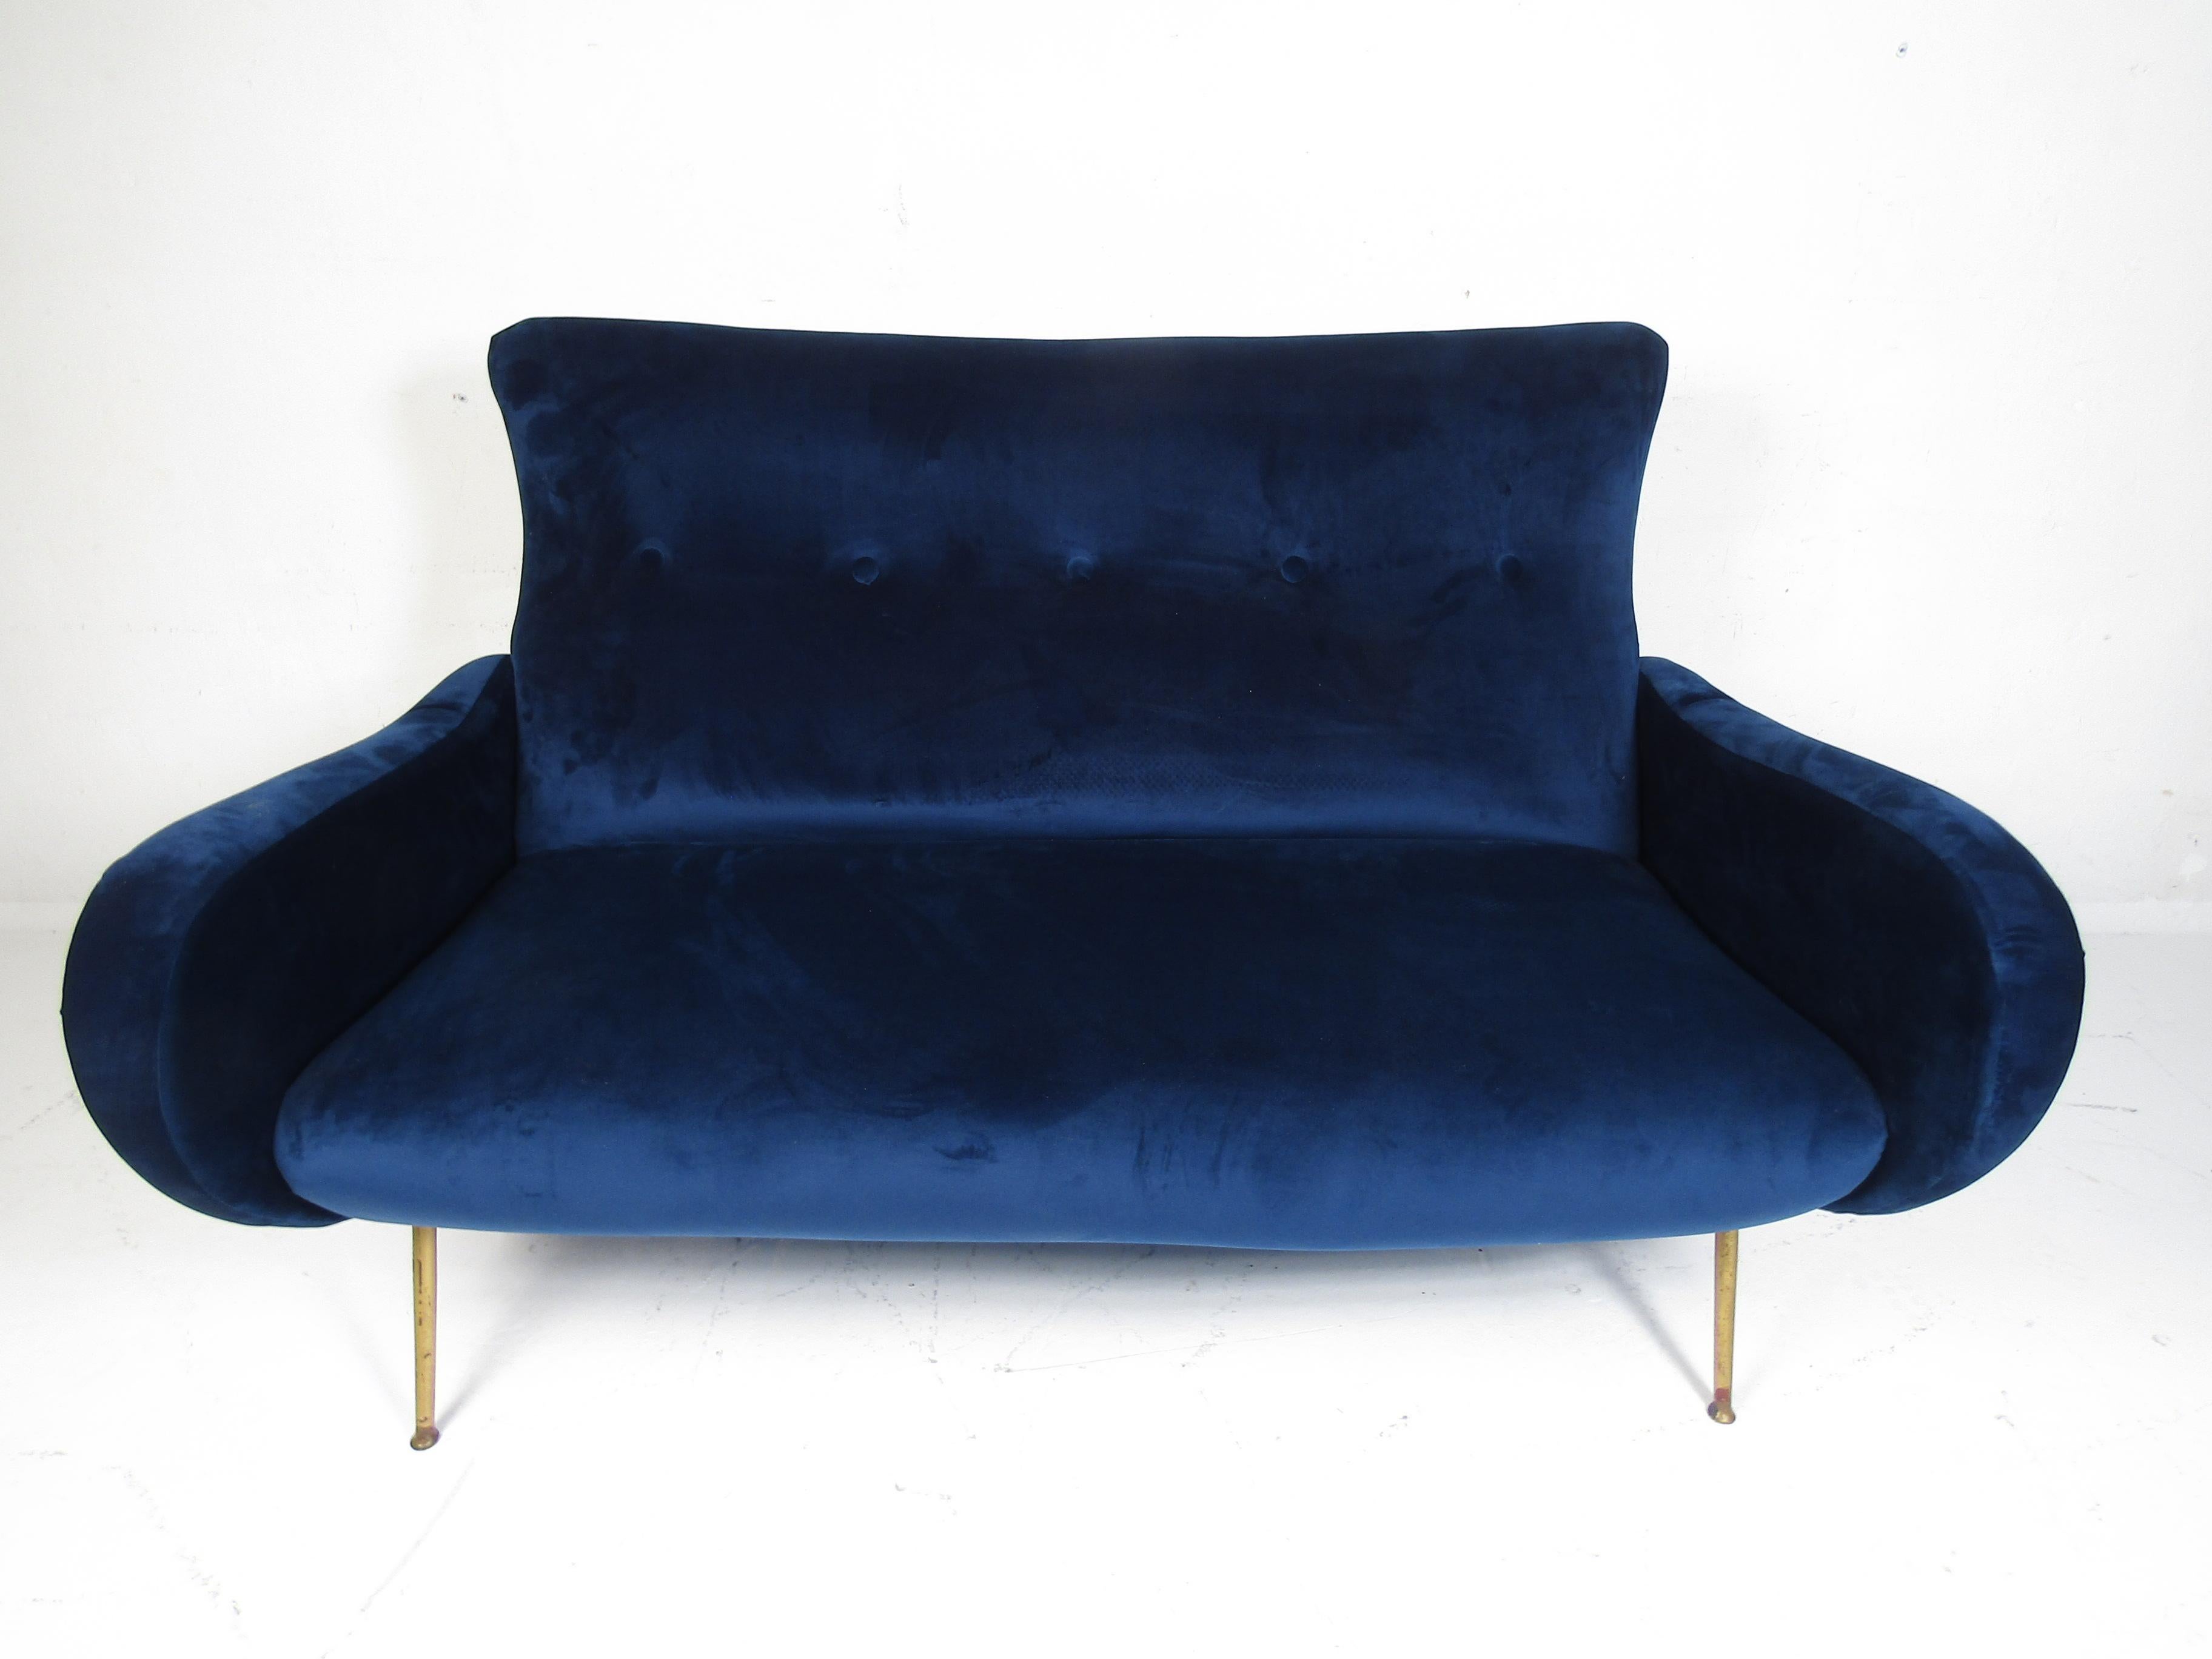 Stylish Italian sofa. Deep blue velvet upholstery with tufted backrest. Sculpted arms. Splayed brass legs. Please confirm item location with dealer (NJ or NY).